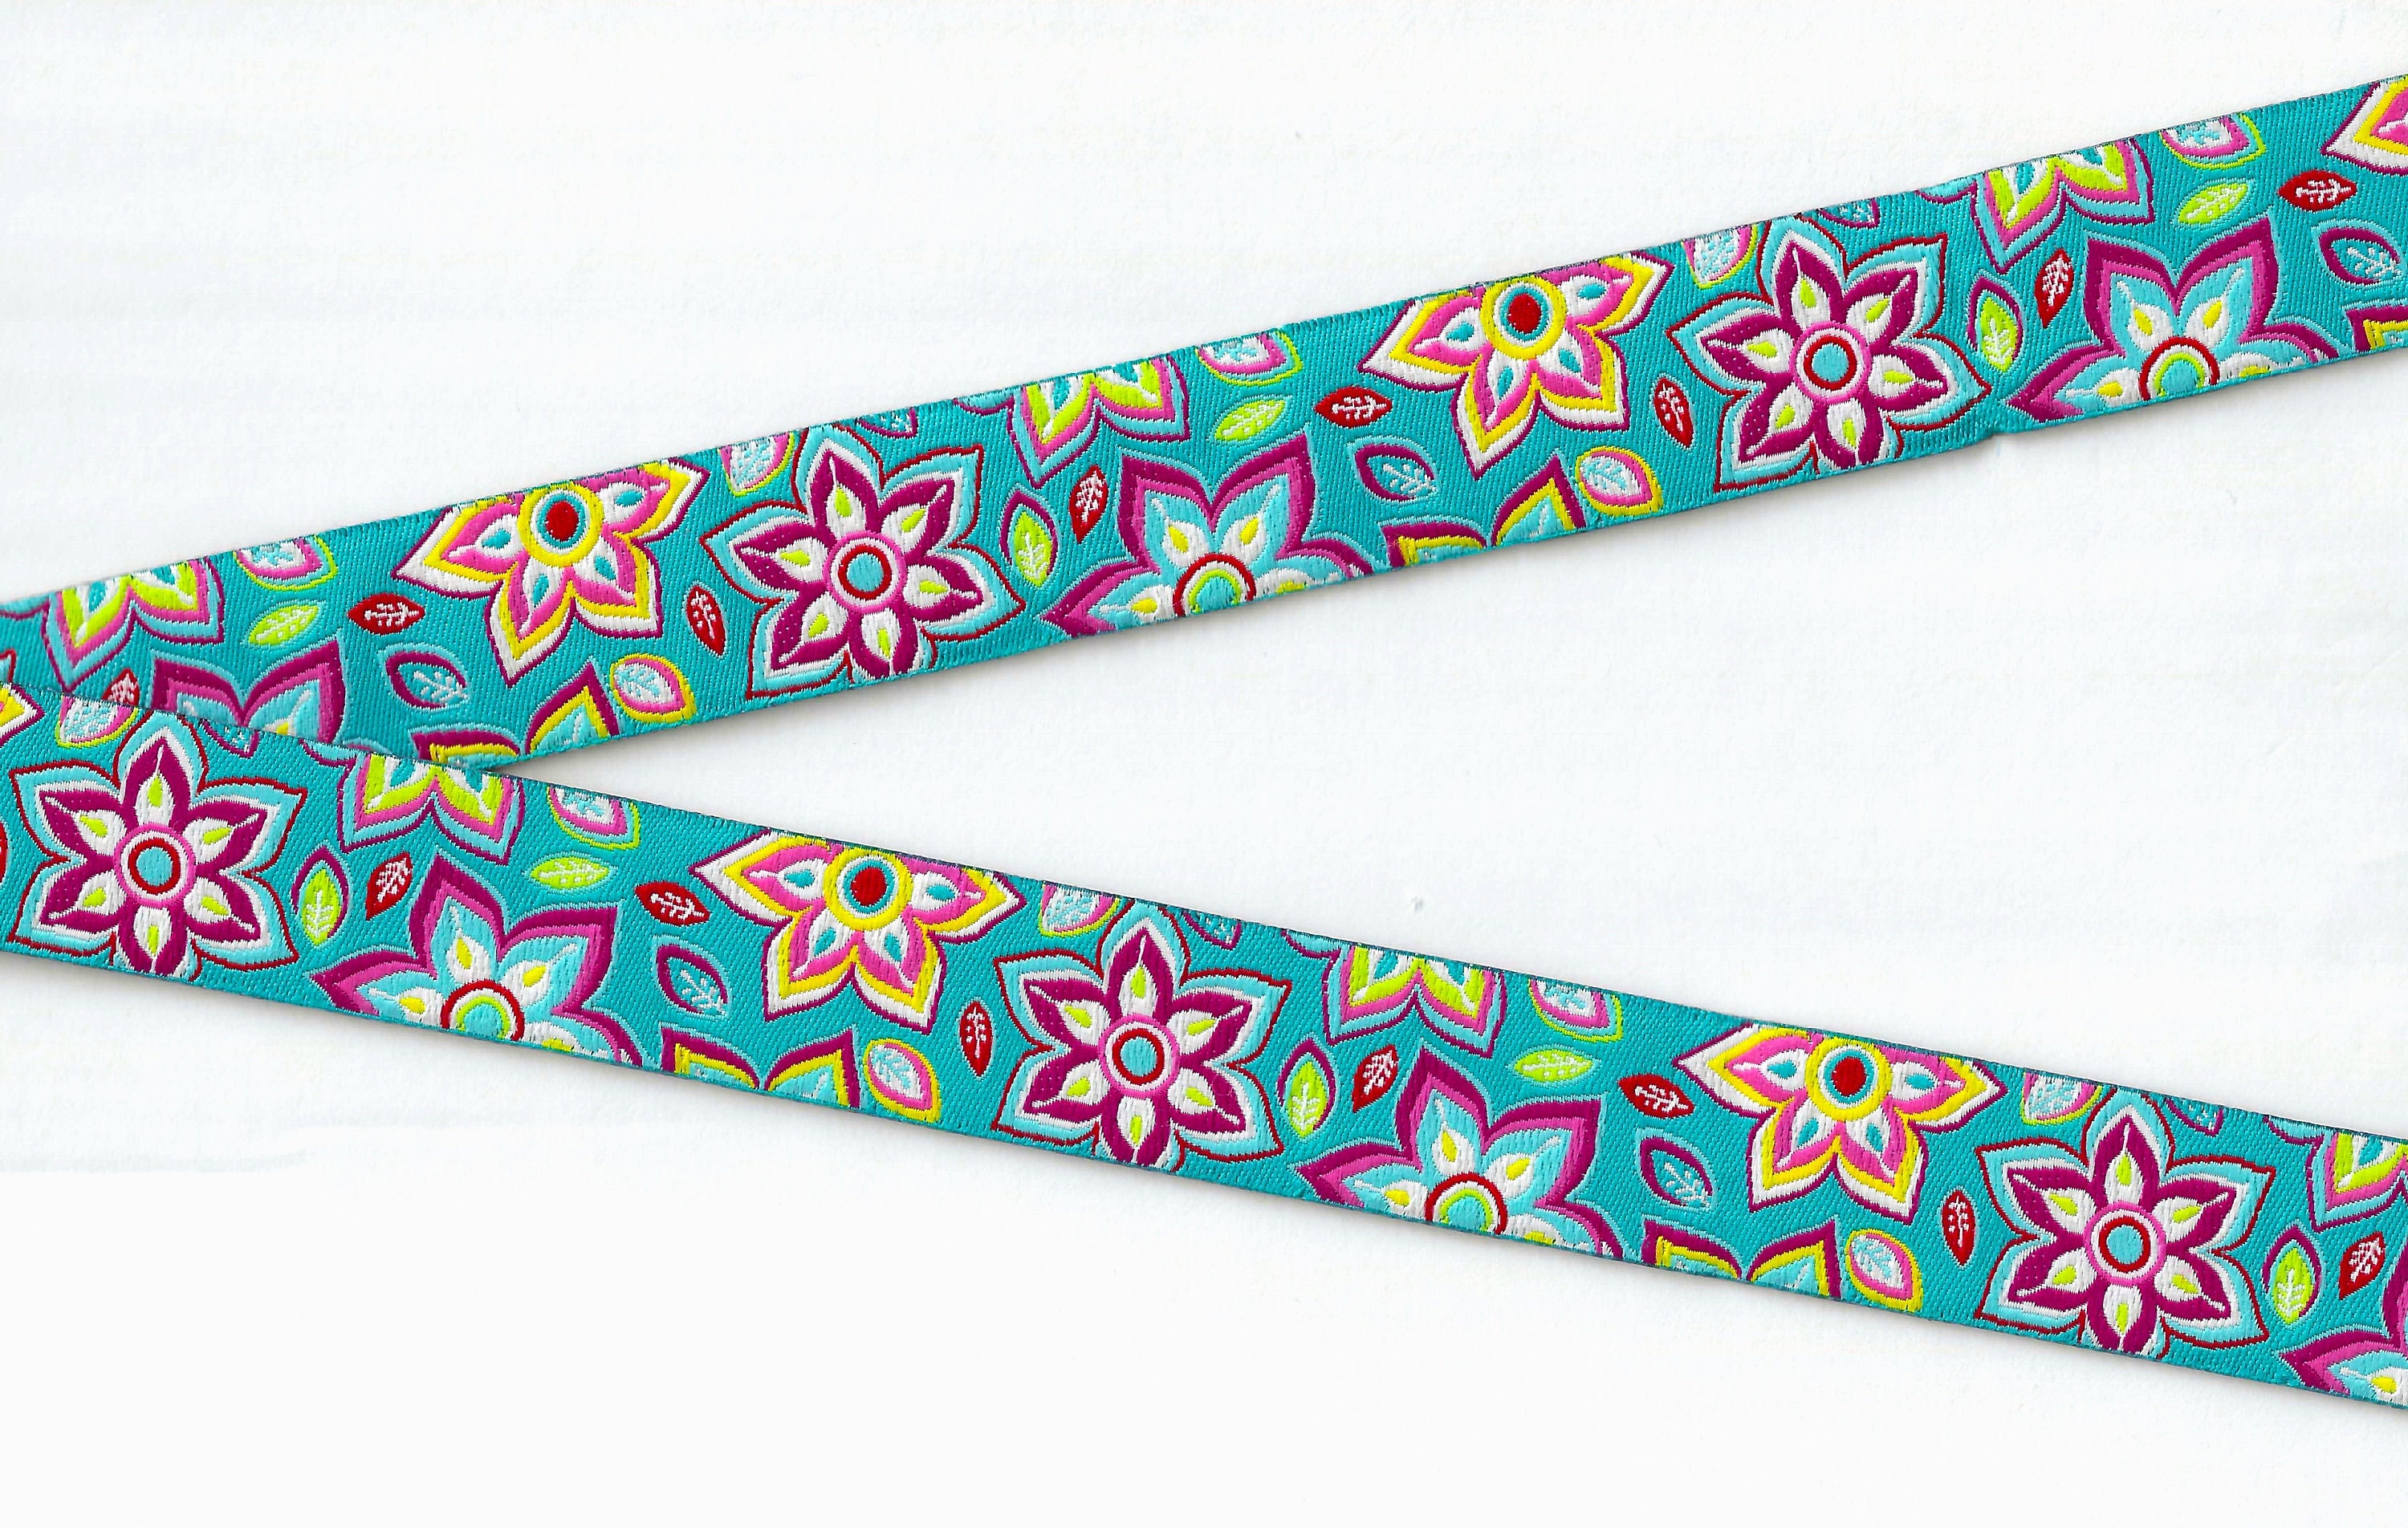 FLORAL E-36-A Jacquard Ribbon Poly Trim 7/8 wide (22mm) Teal Background  w/Large Multi-Colored Flowers, Hawaiian, Tropical, Per Yard